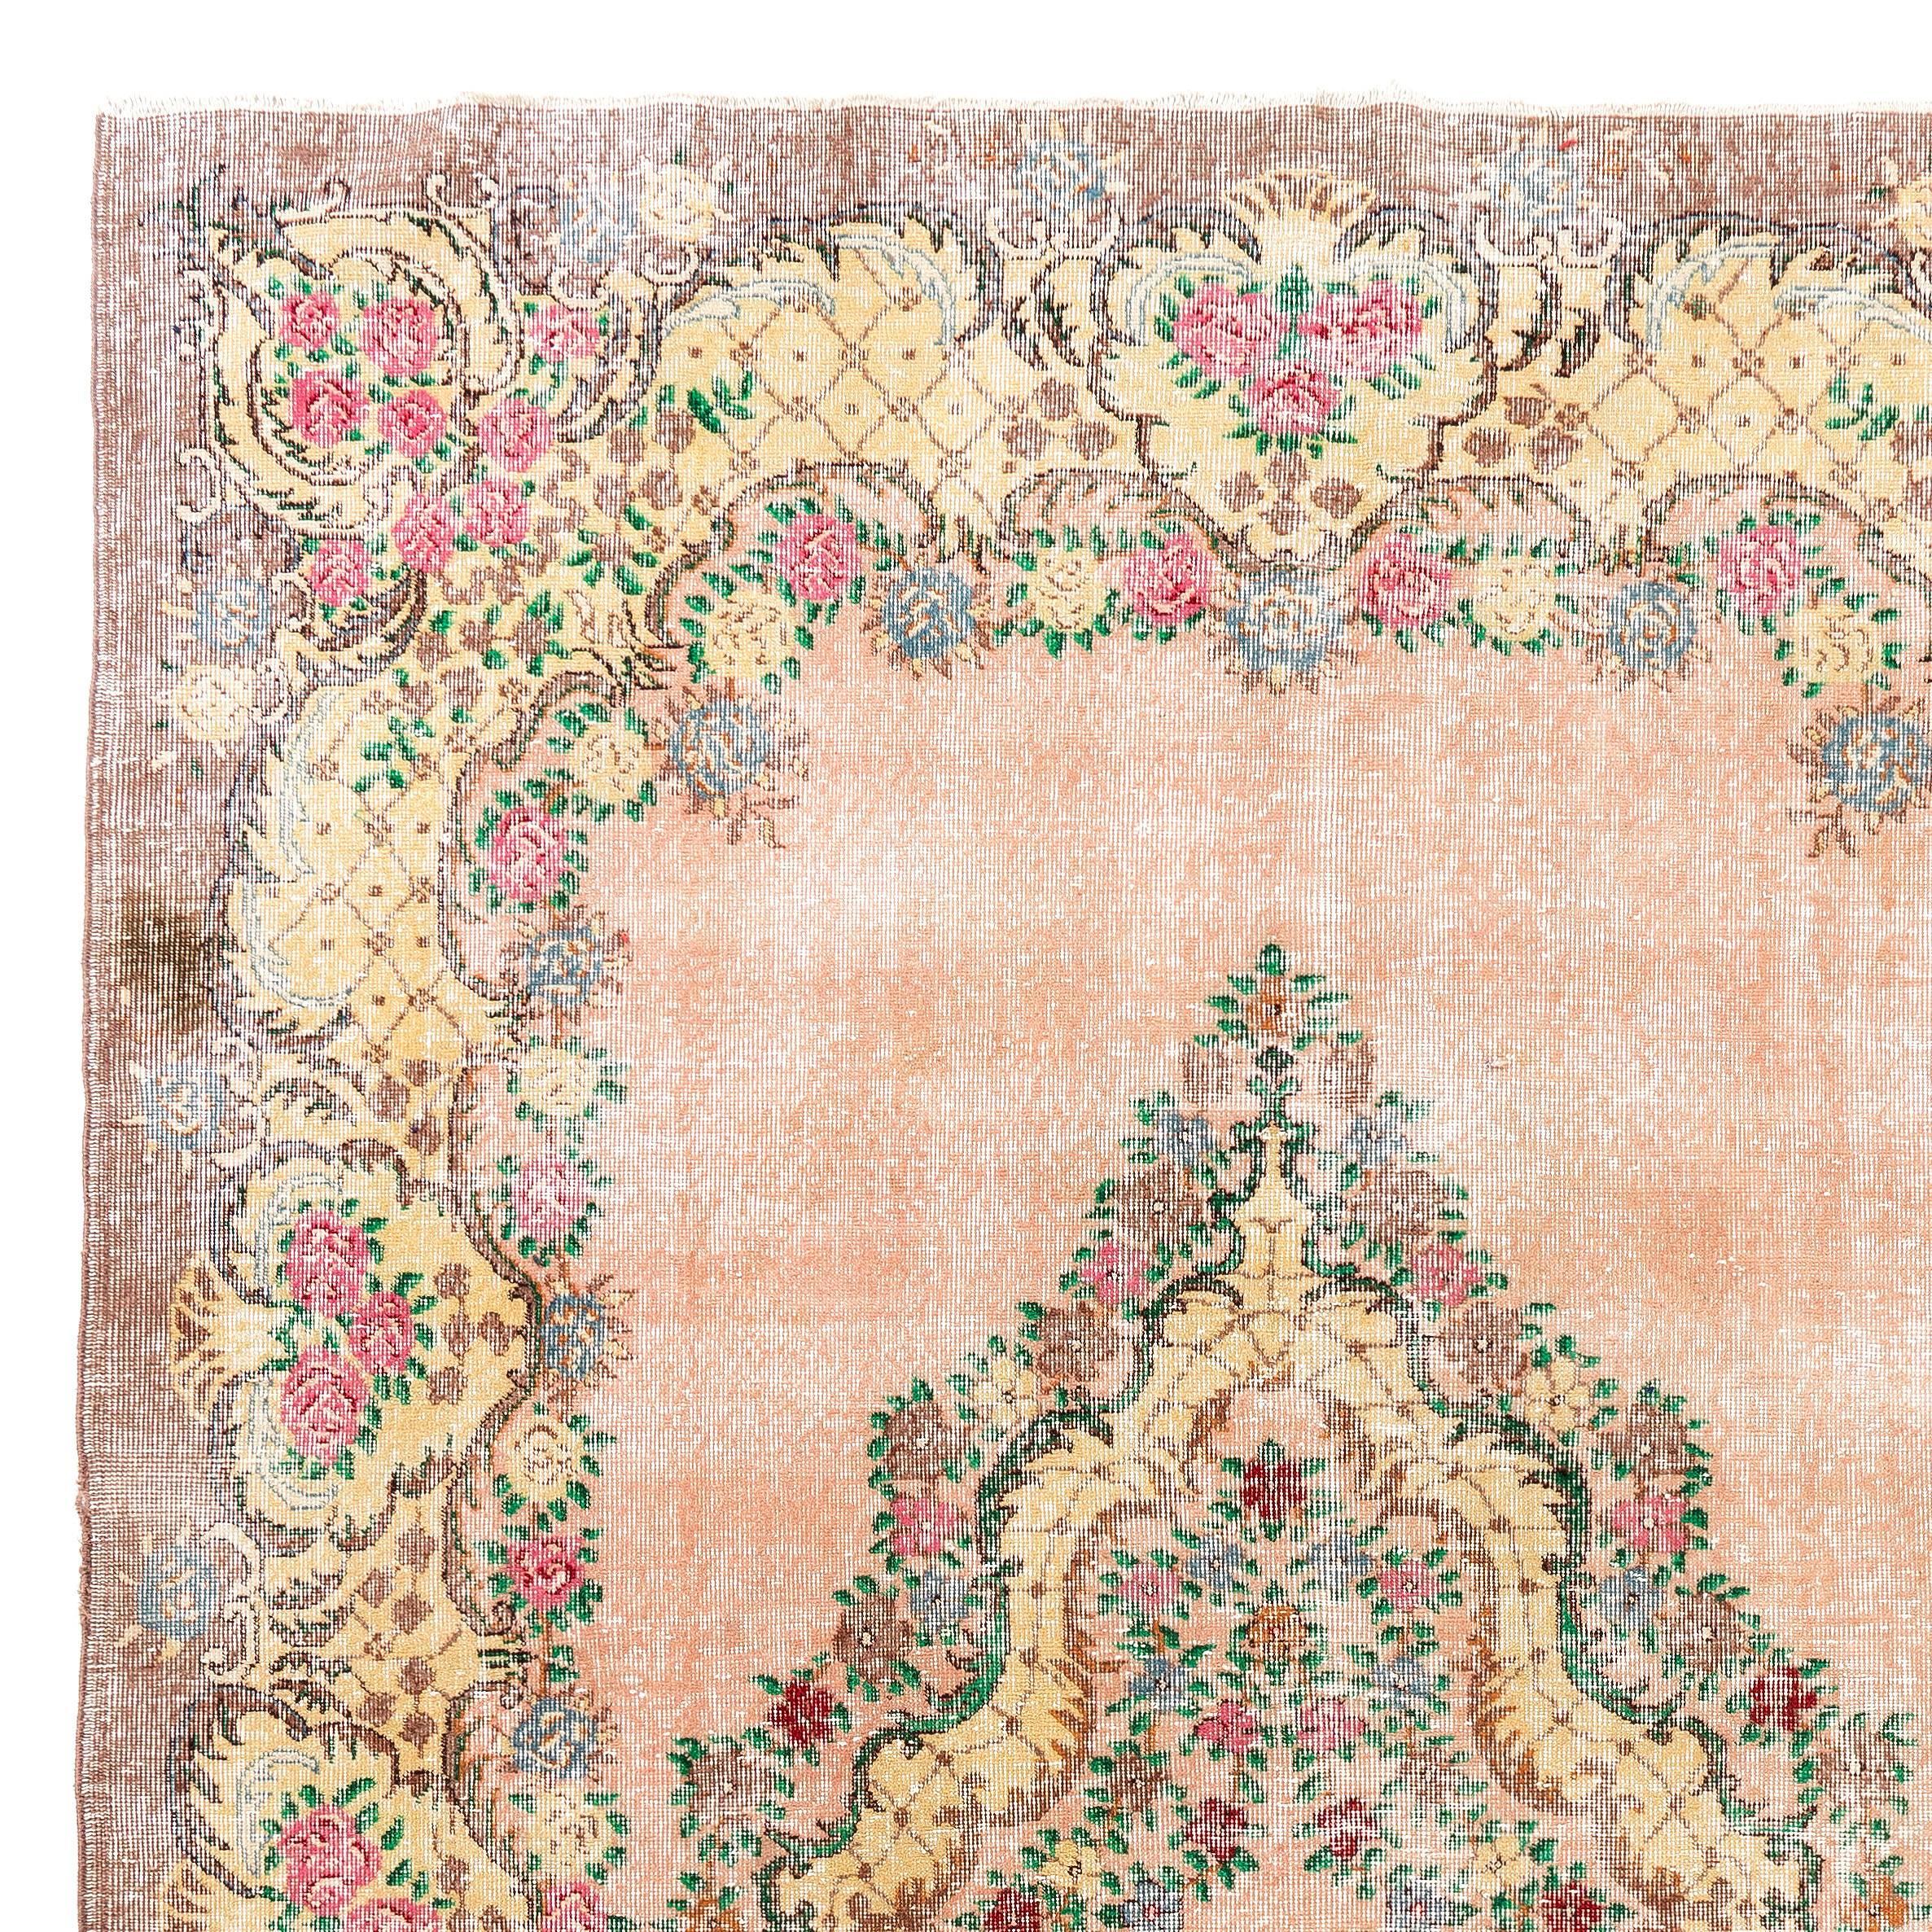 A finely hand-knotted vintage Turkish carpet from the 1960s featuring an ever popular European garden design in glowing tones of peach and yellow with touches of pink, red and cinnamon. Measures: 7.4 x 11 Ft

The rug has even low wool pile on cotton